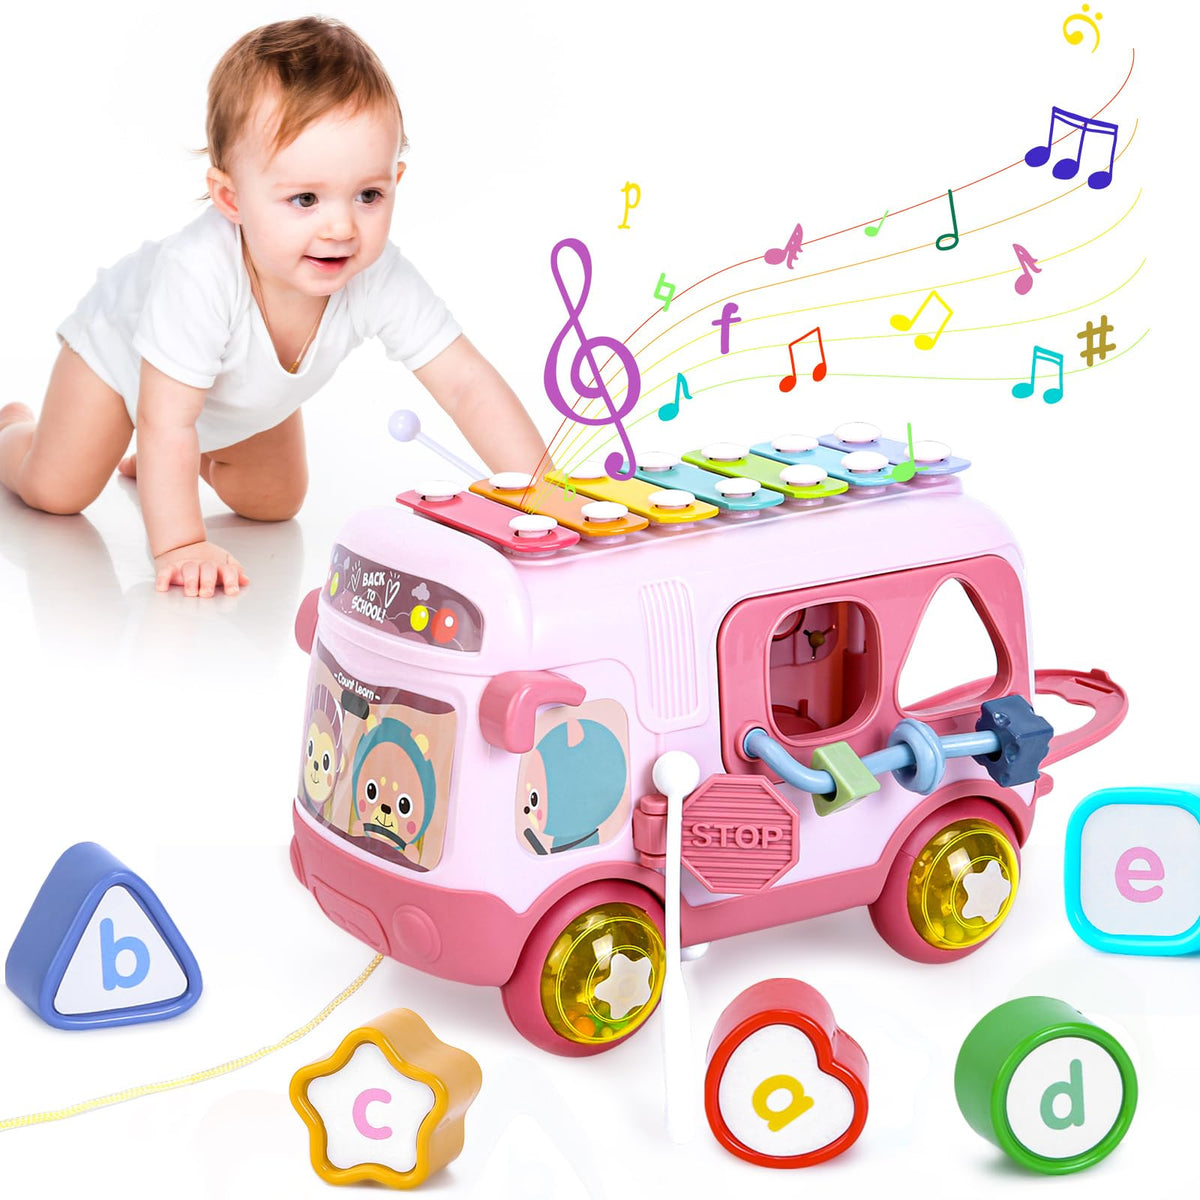 Toys Gifts for 1 Year Old Girls, Baby Girl Toy 12 18 Months Musical Sensory Bus with Xylophone, Shape Sorter Pull Along Toy for 12-18 Months Early Educational Toy Birthday Chirstmas Present